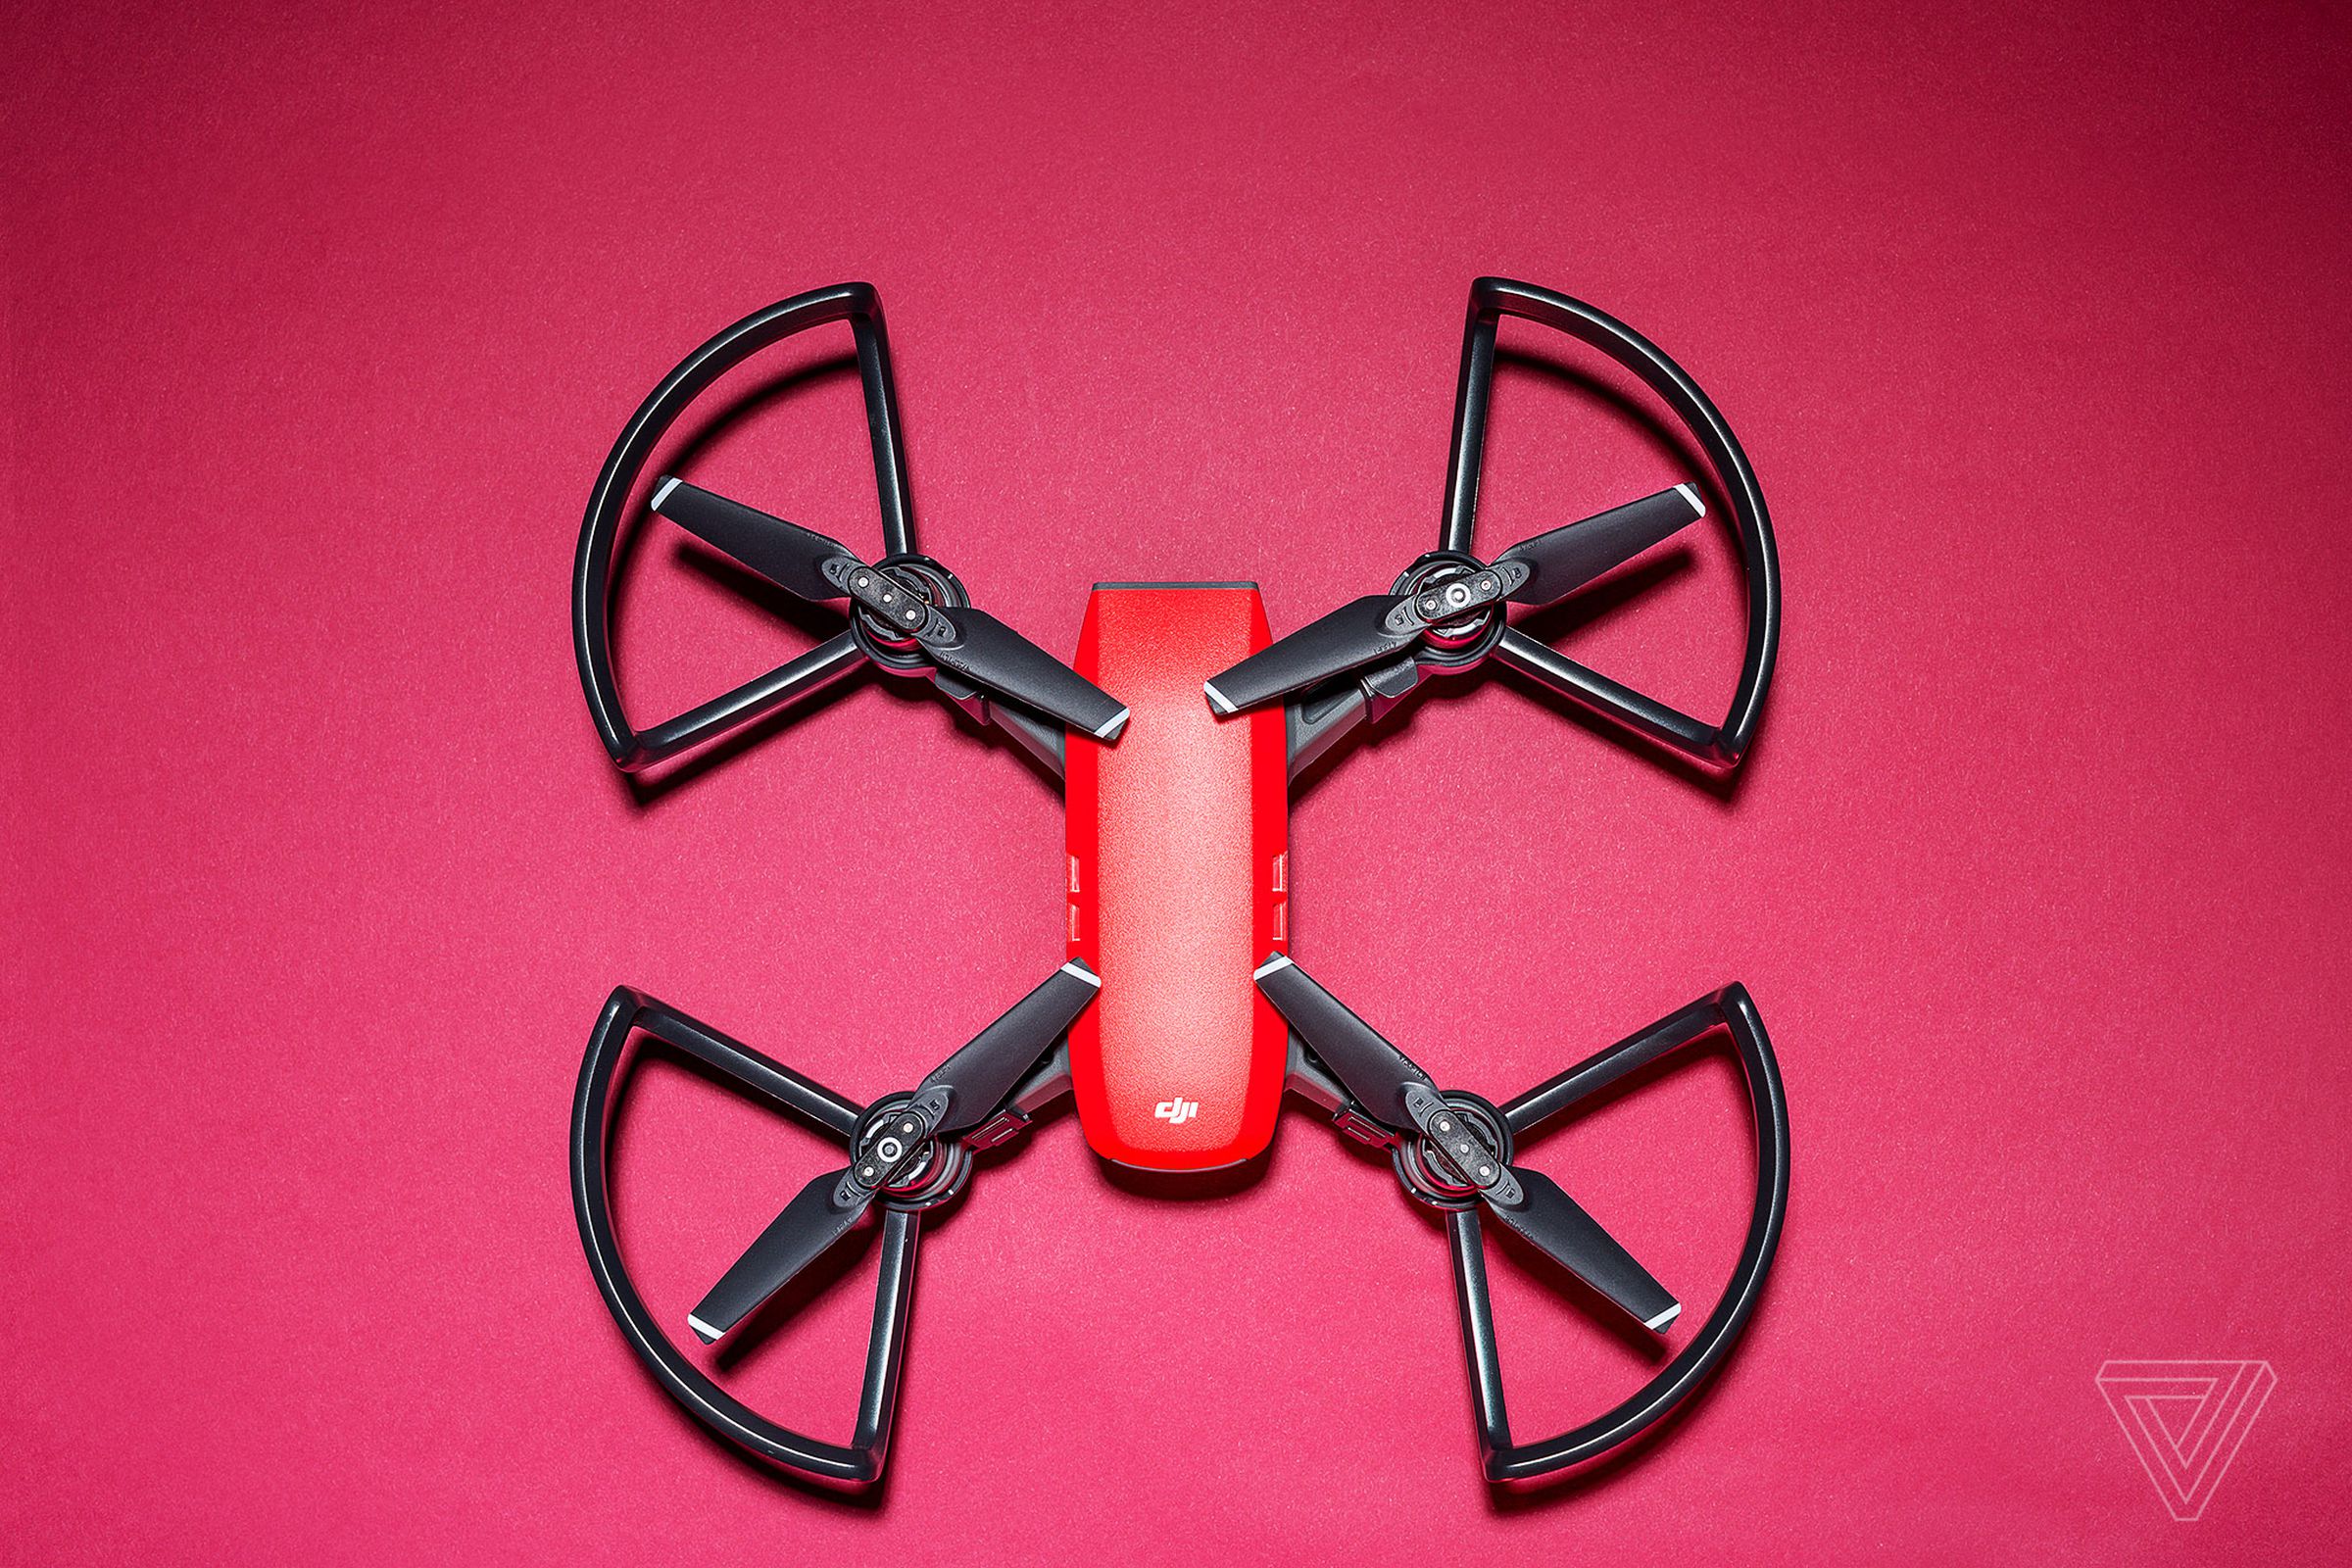 DJI Spark drone top down on red background